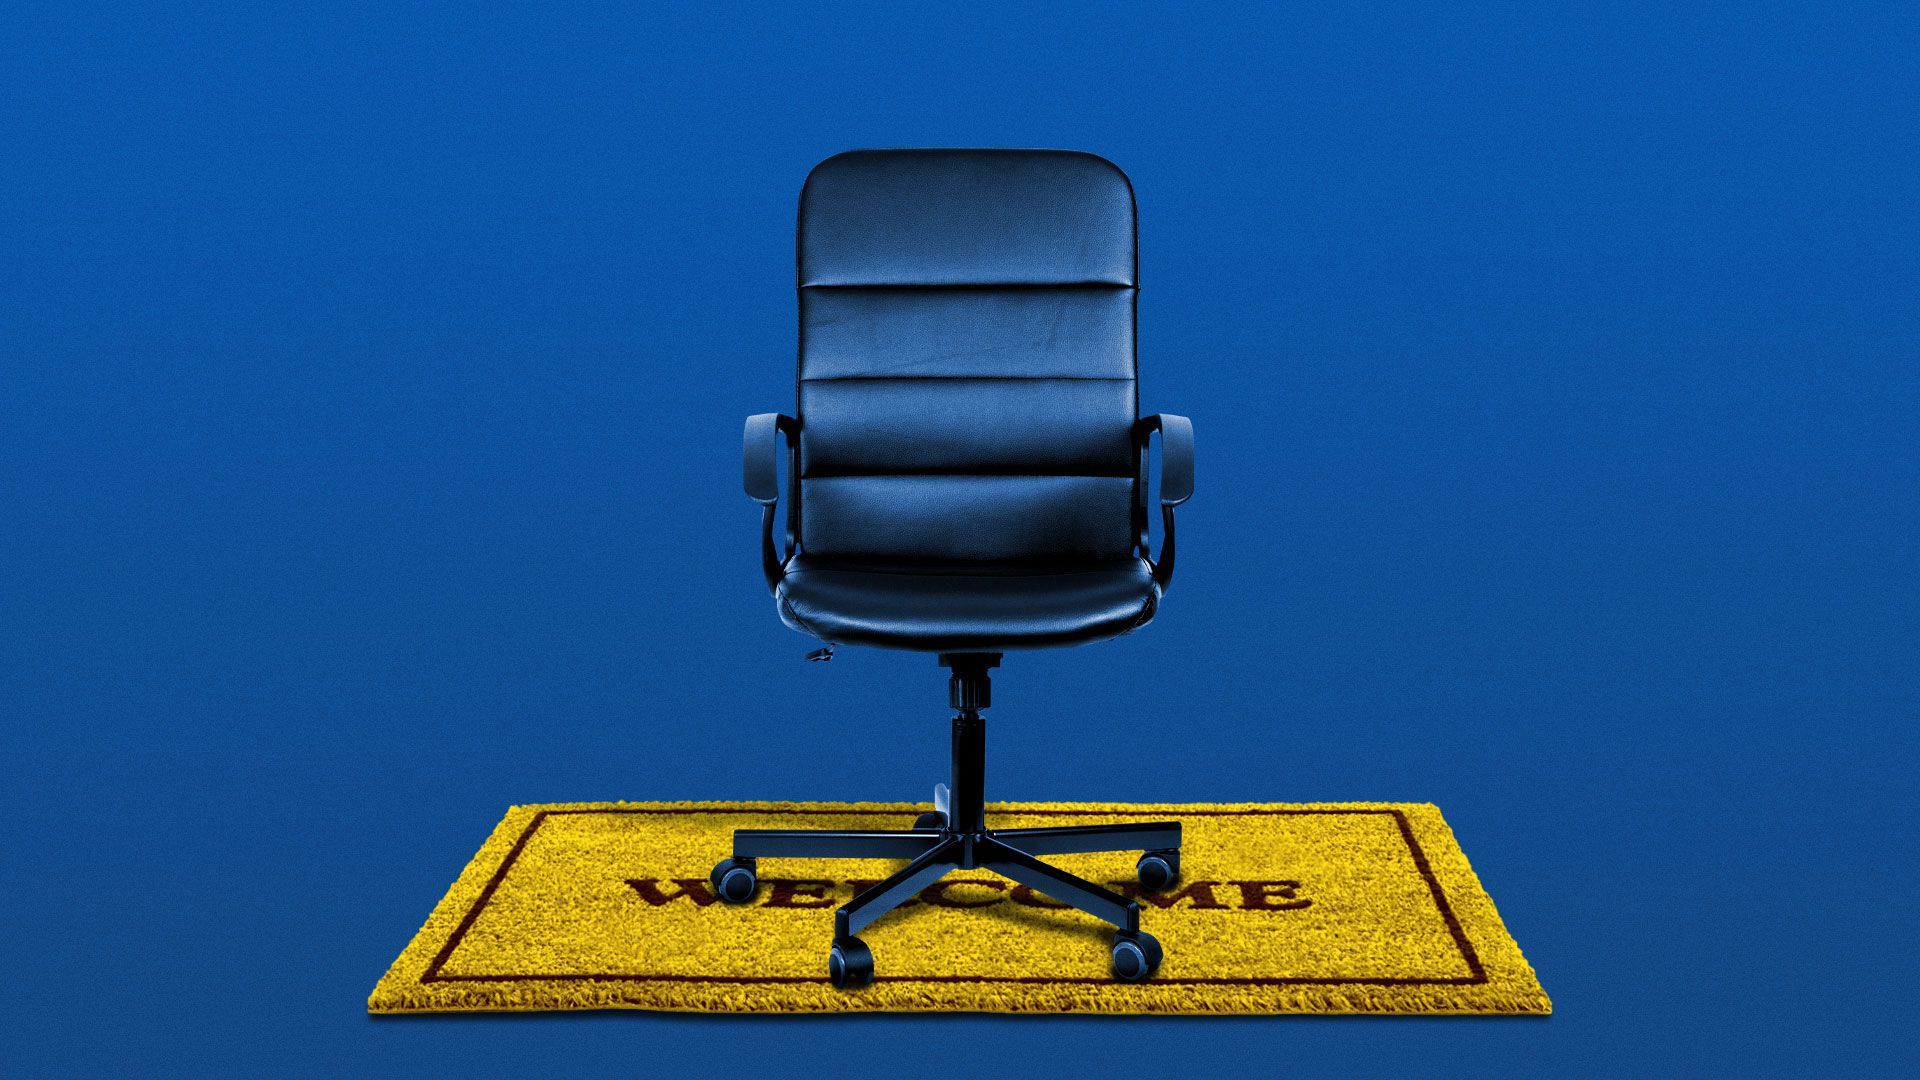 Illustration of a desk chair on a welcome mat.